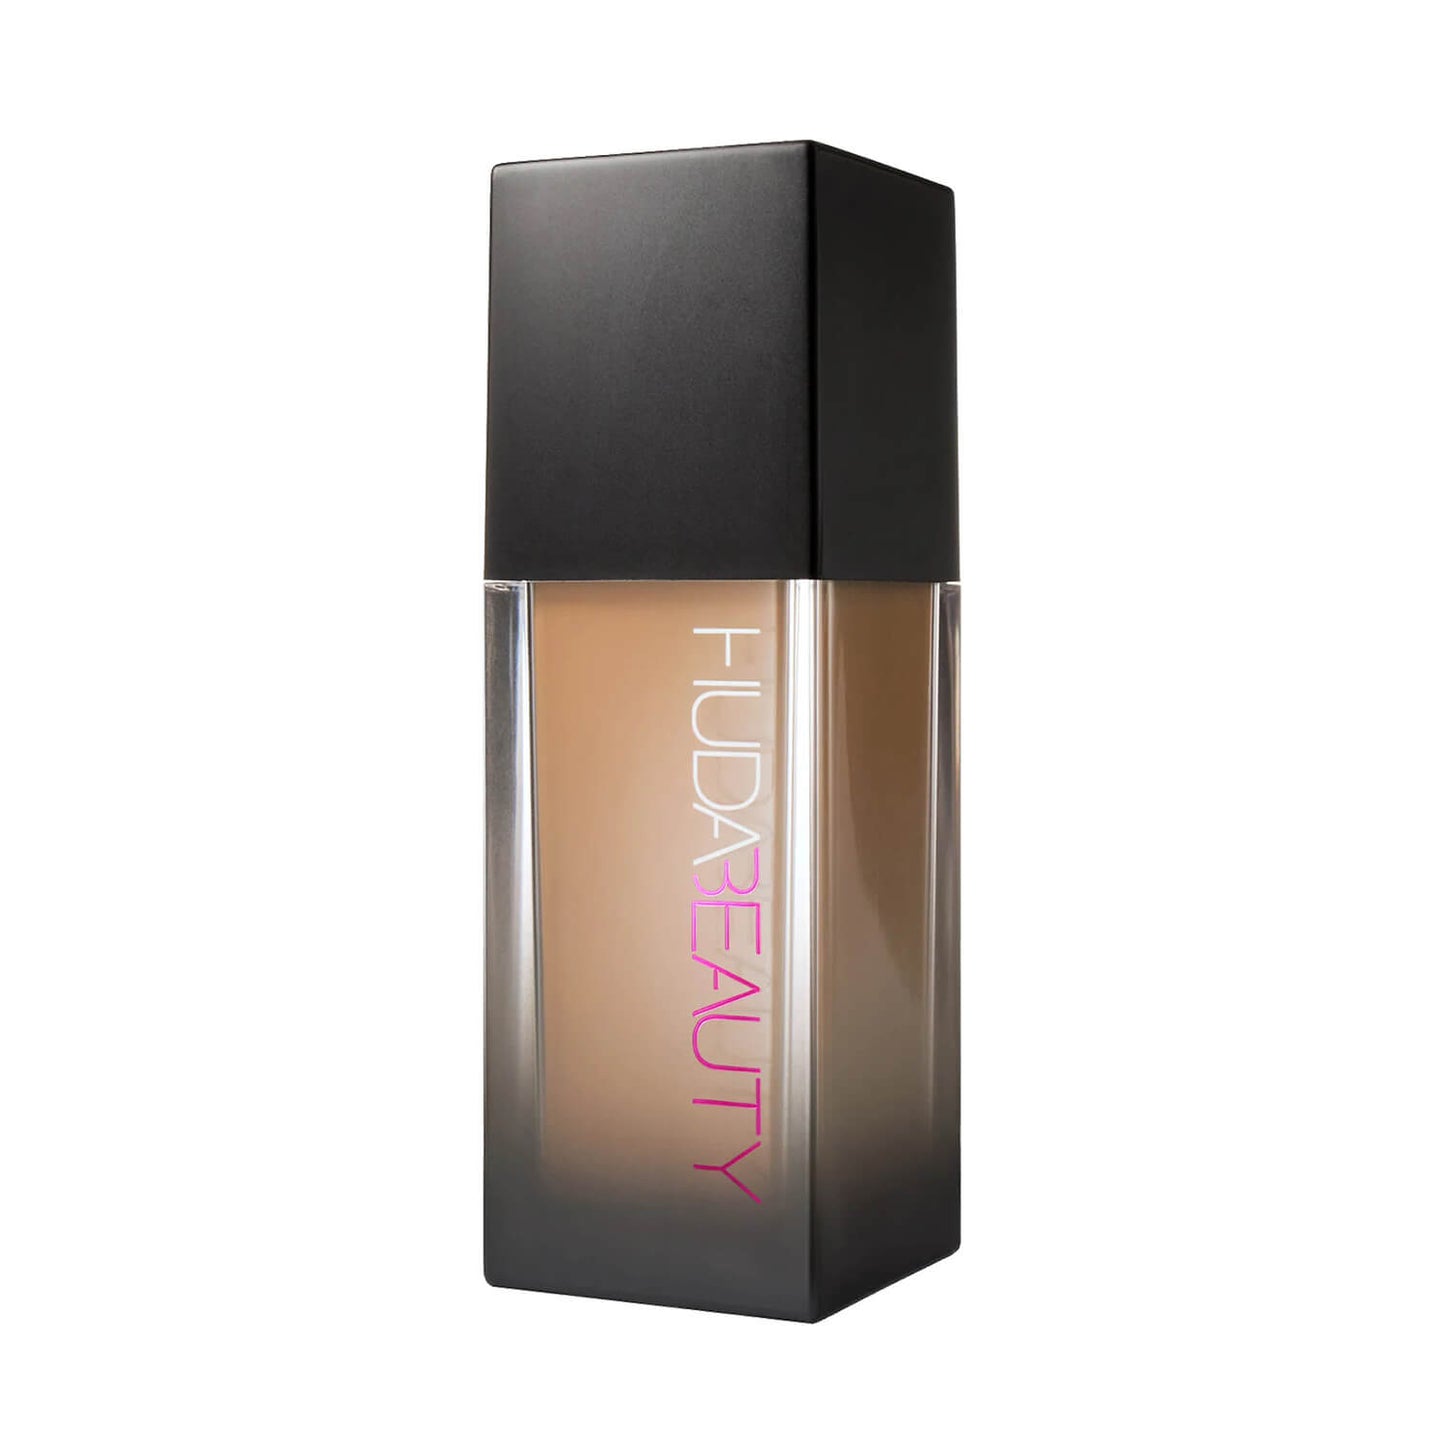 huda beauty luminuous matte foundation available at heygirl.pk for cash on delivery in Pakistan